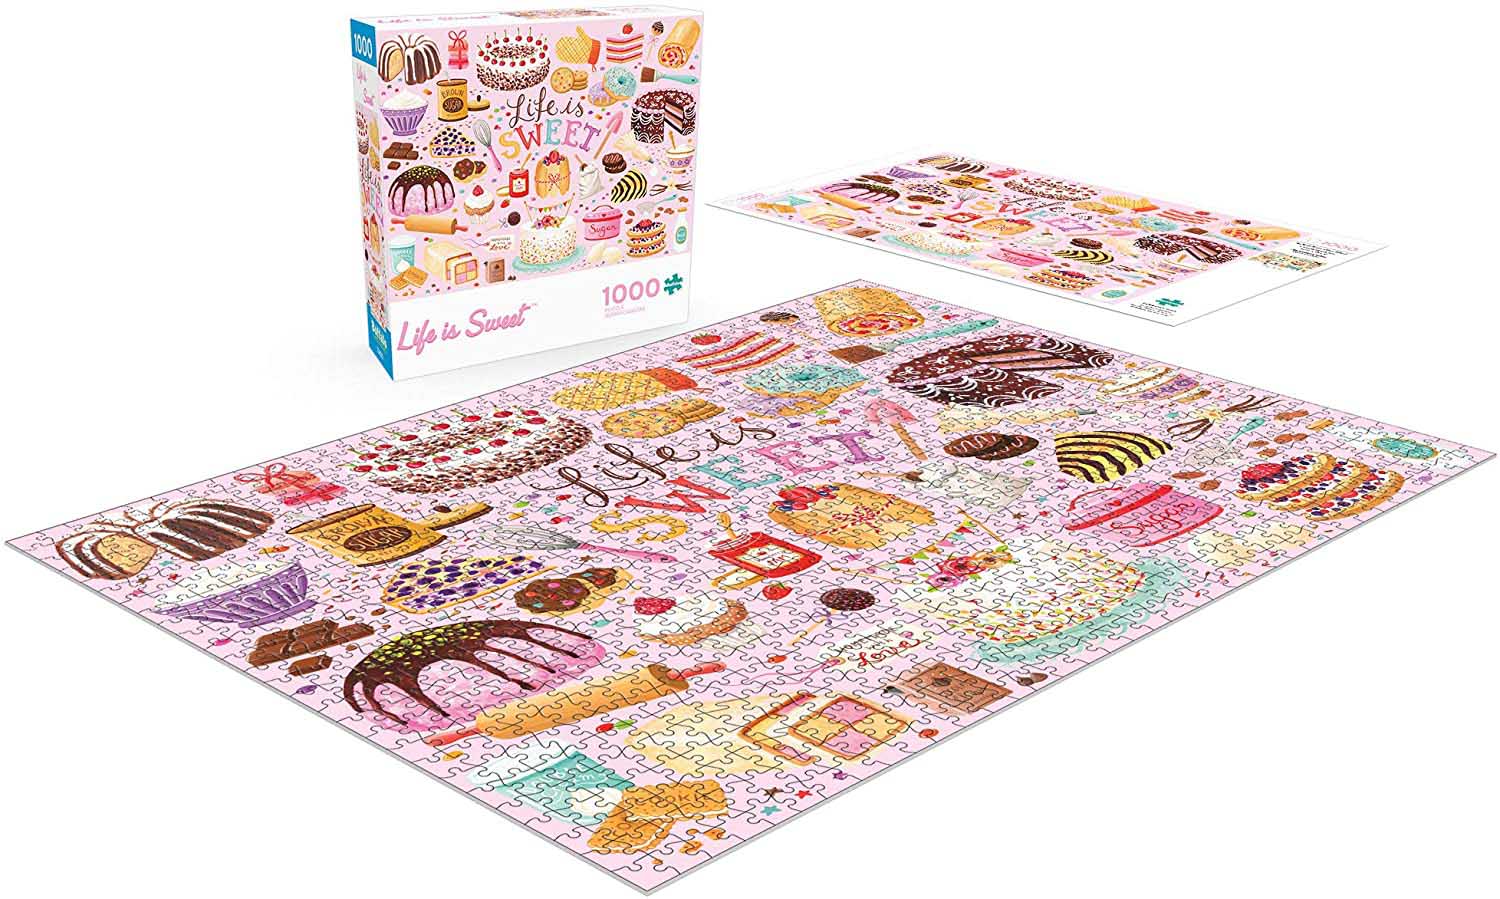 Life is Sweet Dessert & Sweets Jigsaw Puzzle